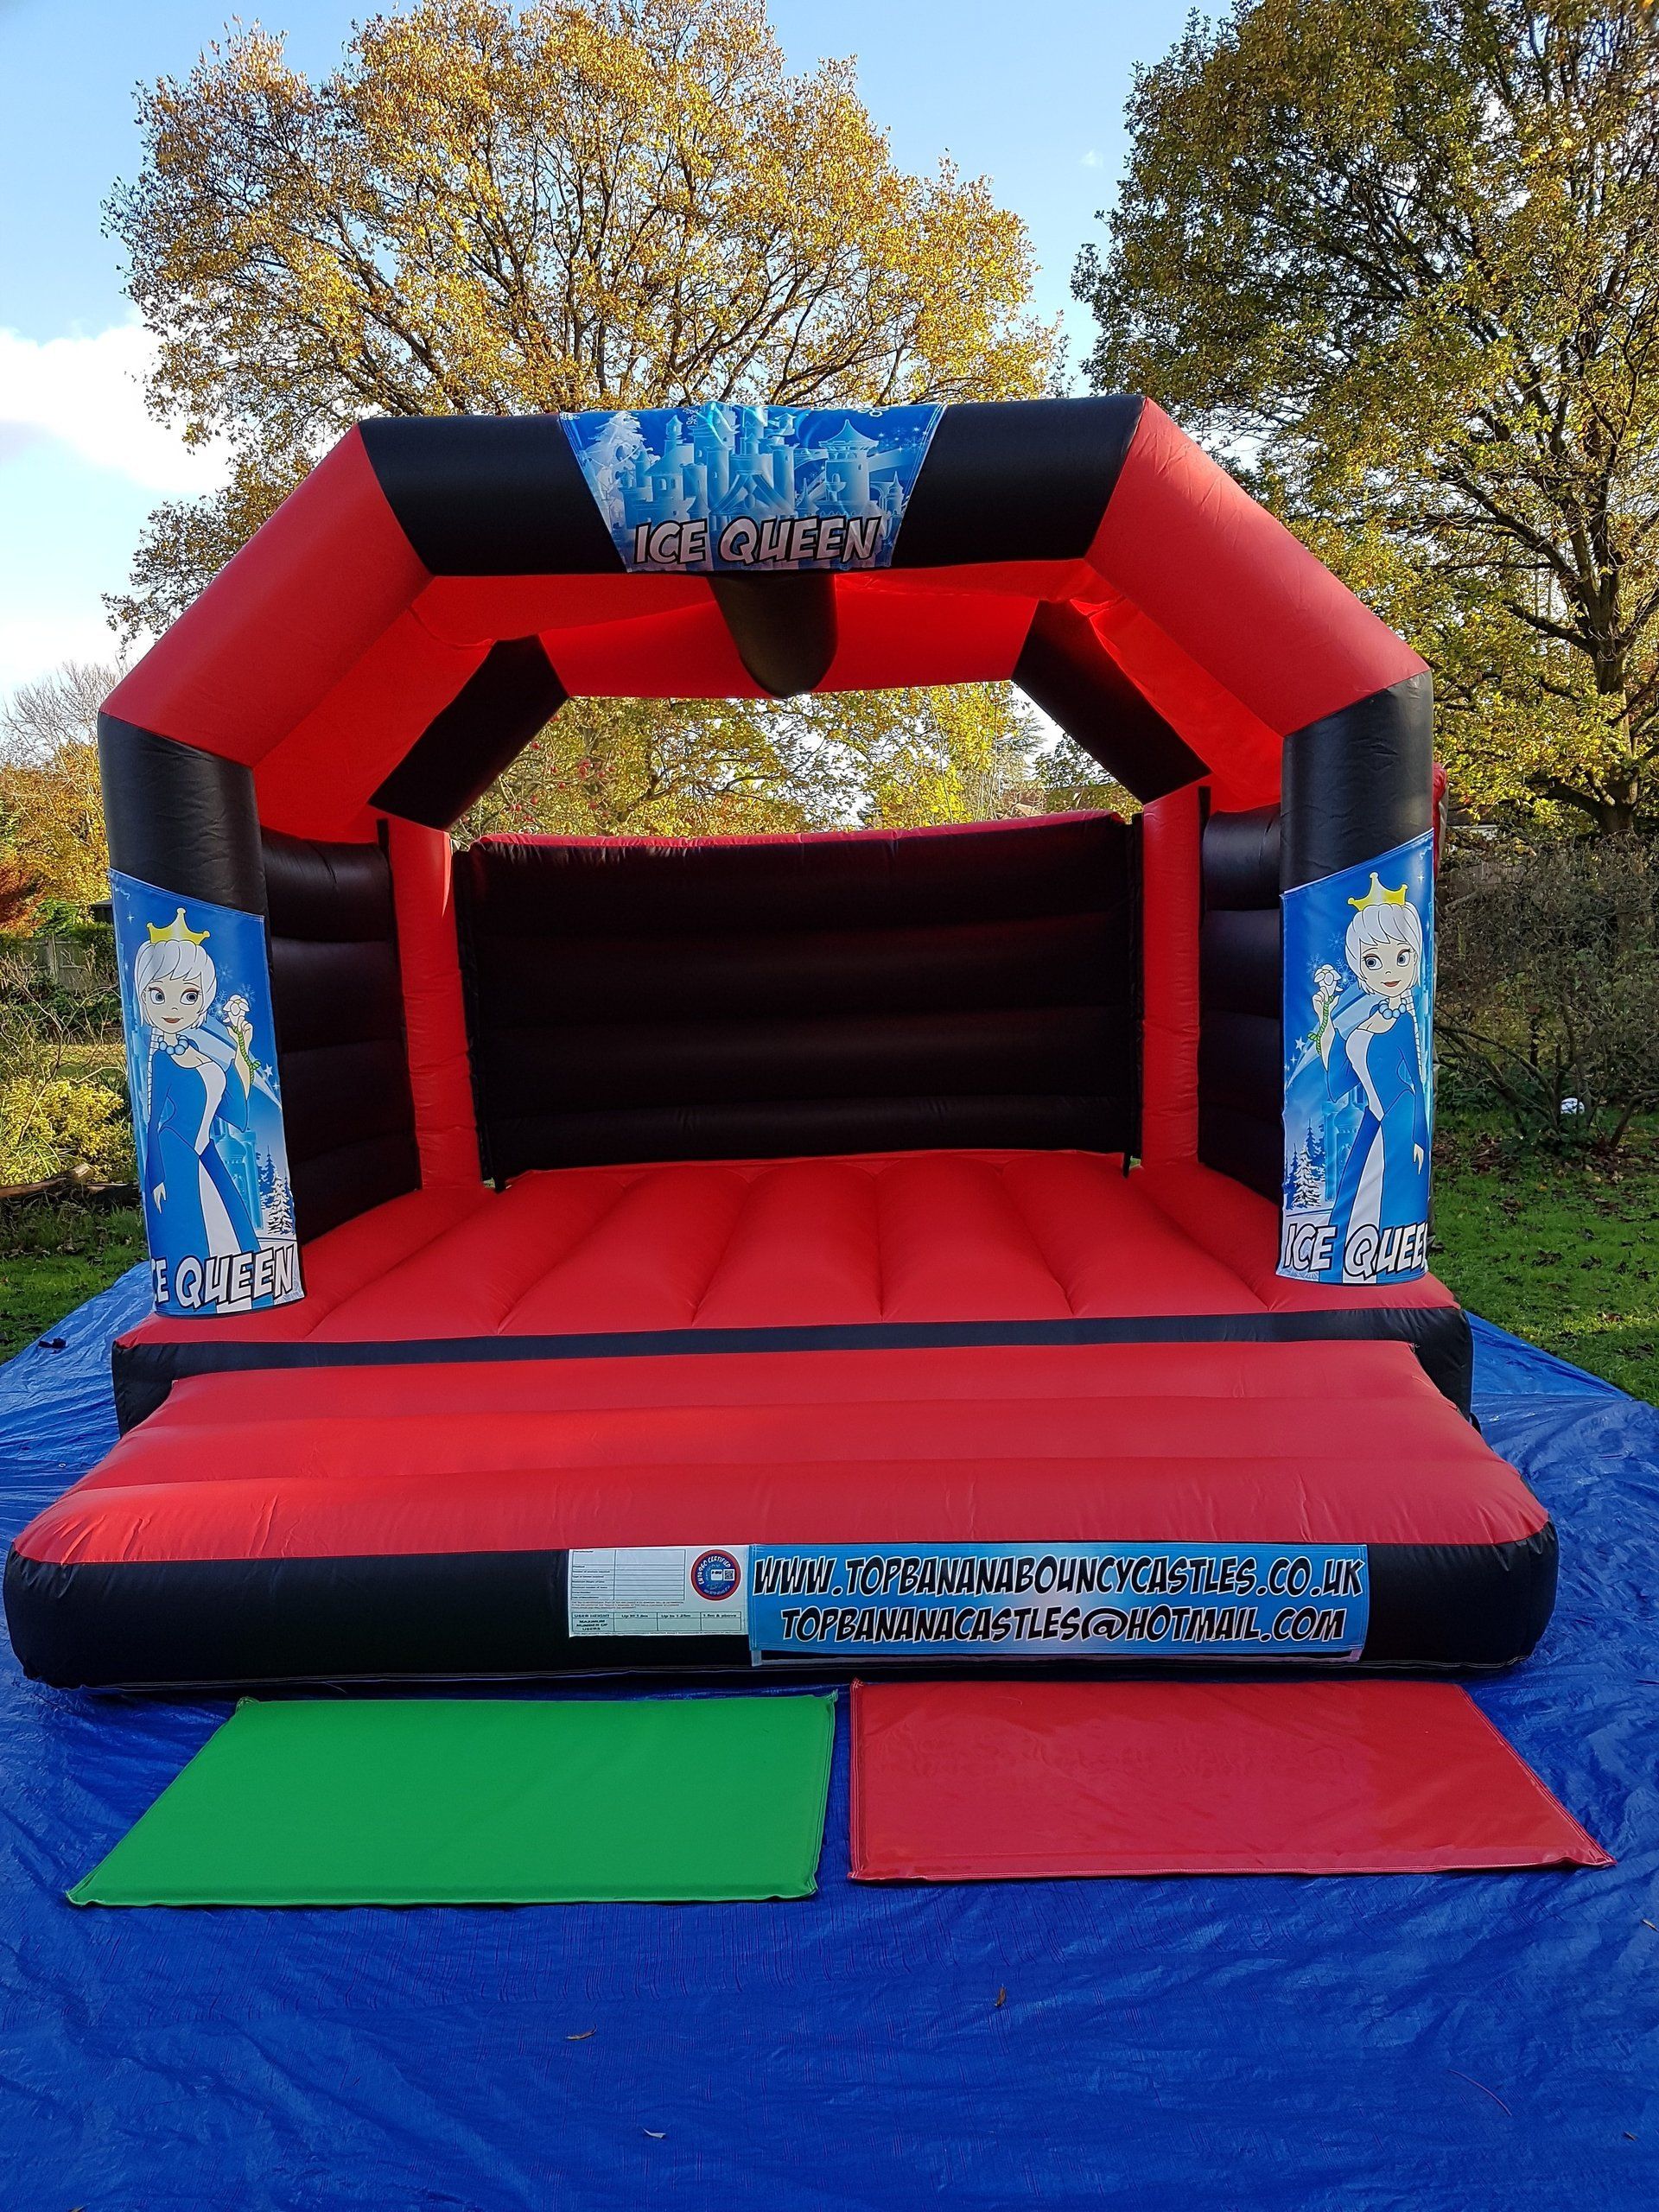 red and black adult bouncy castle with snow queen artwork